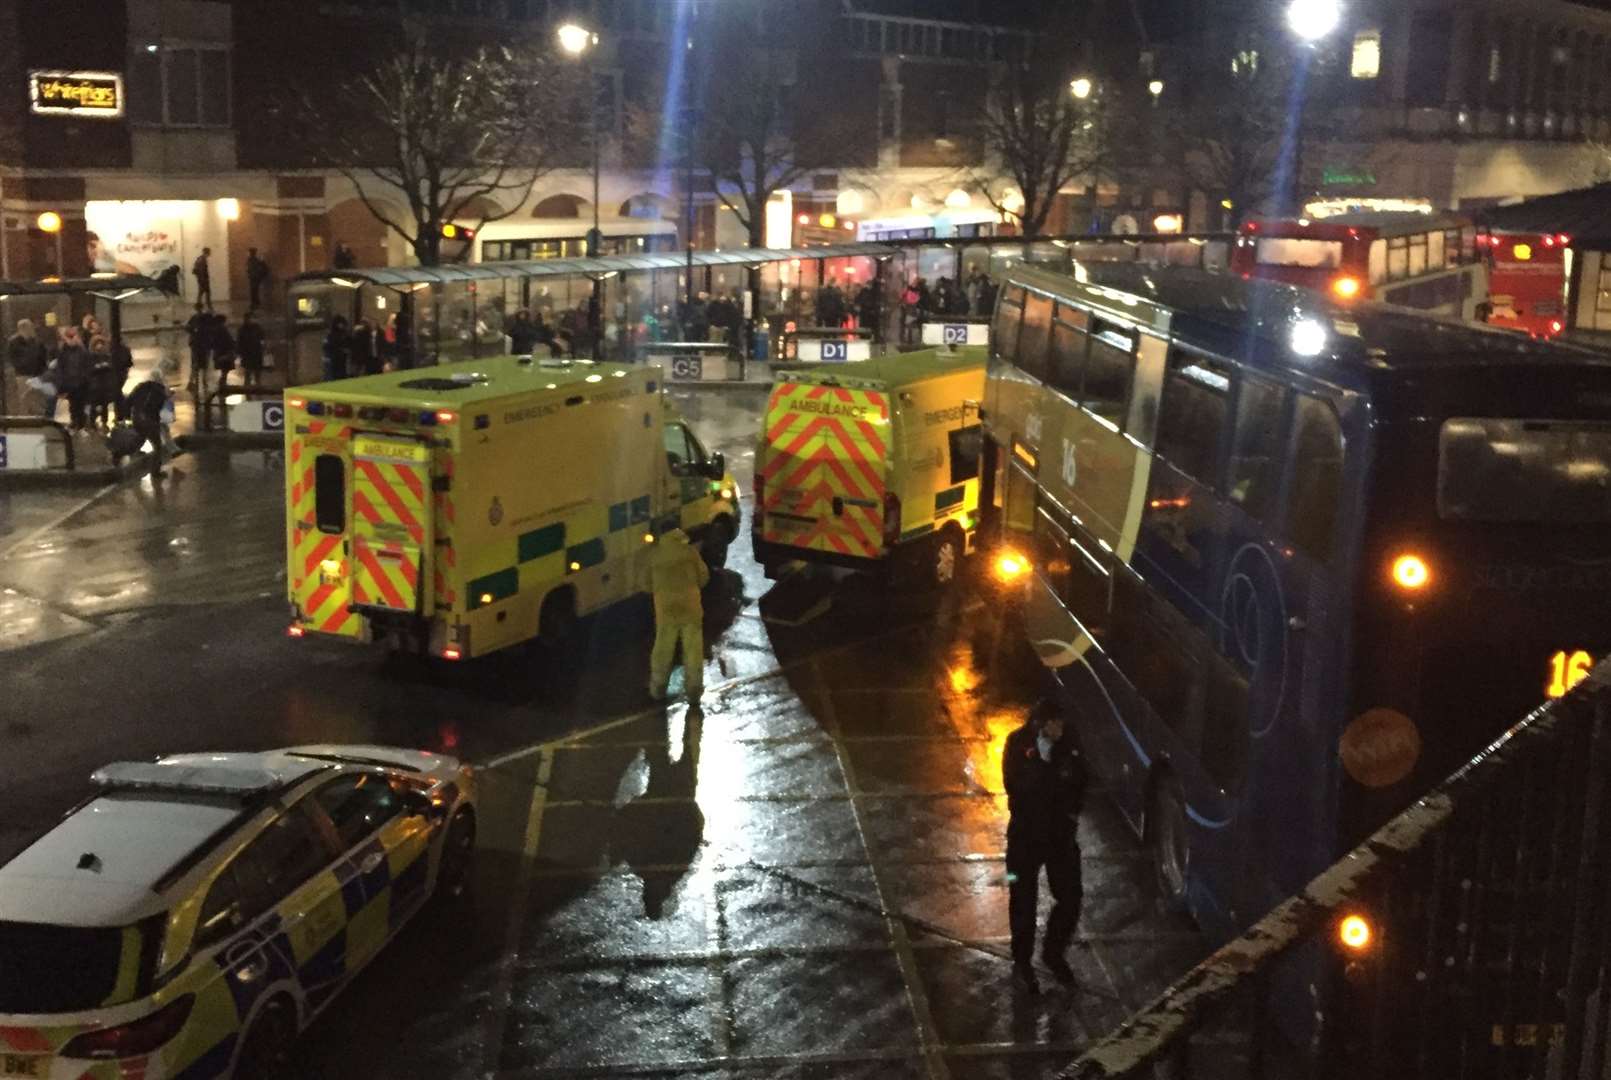 Emergency services as the scene